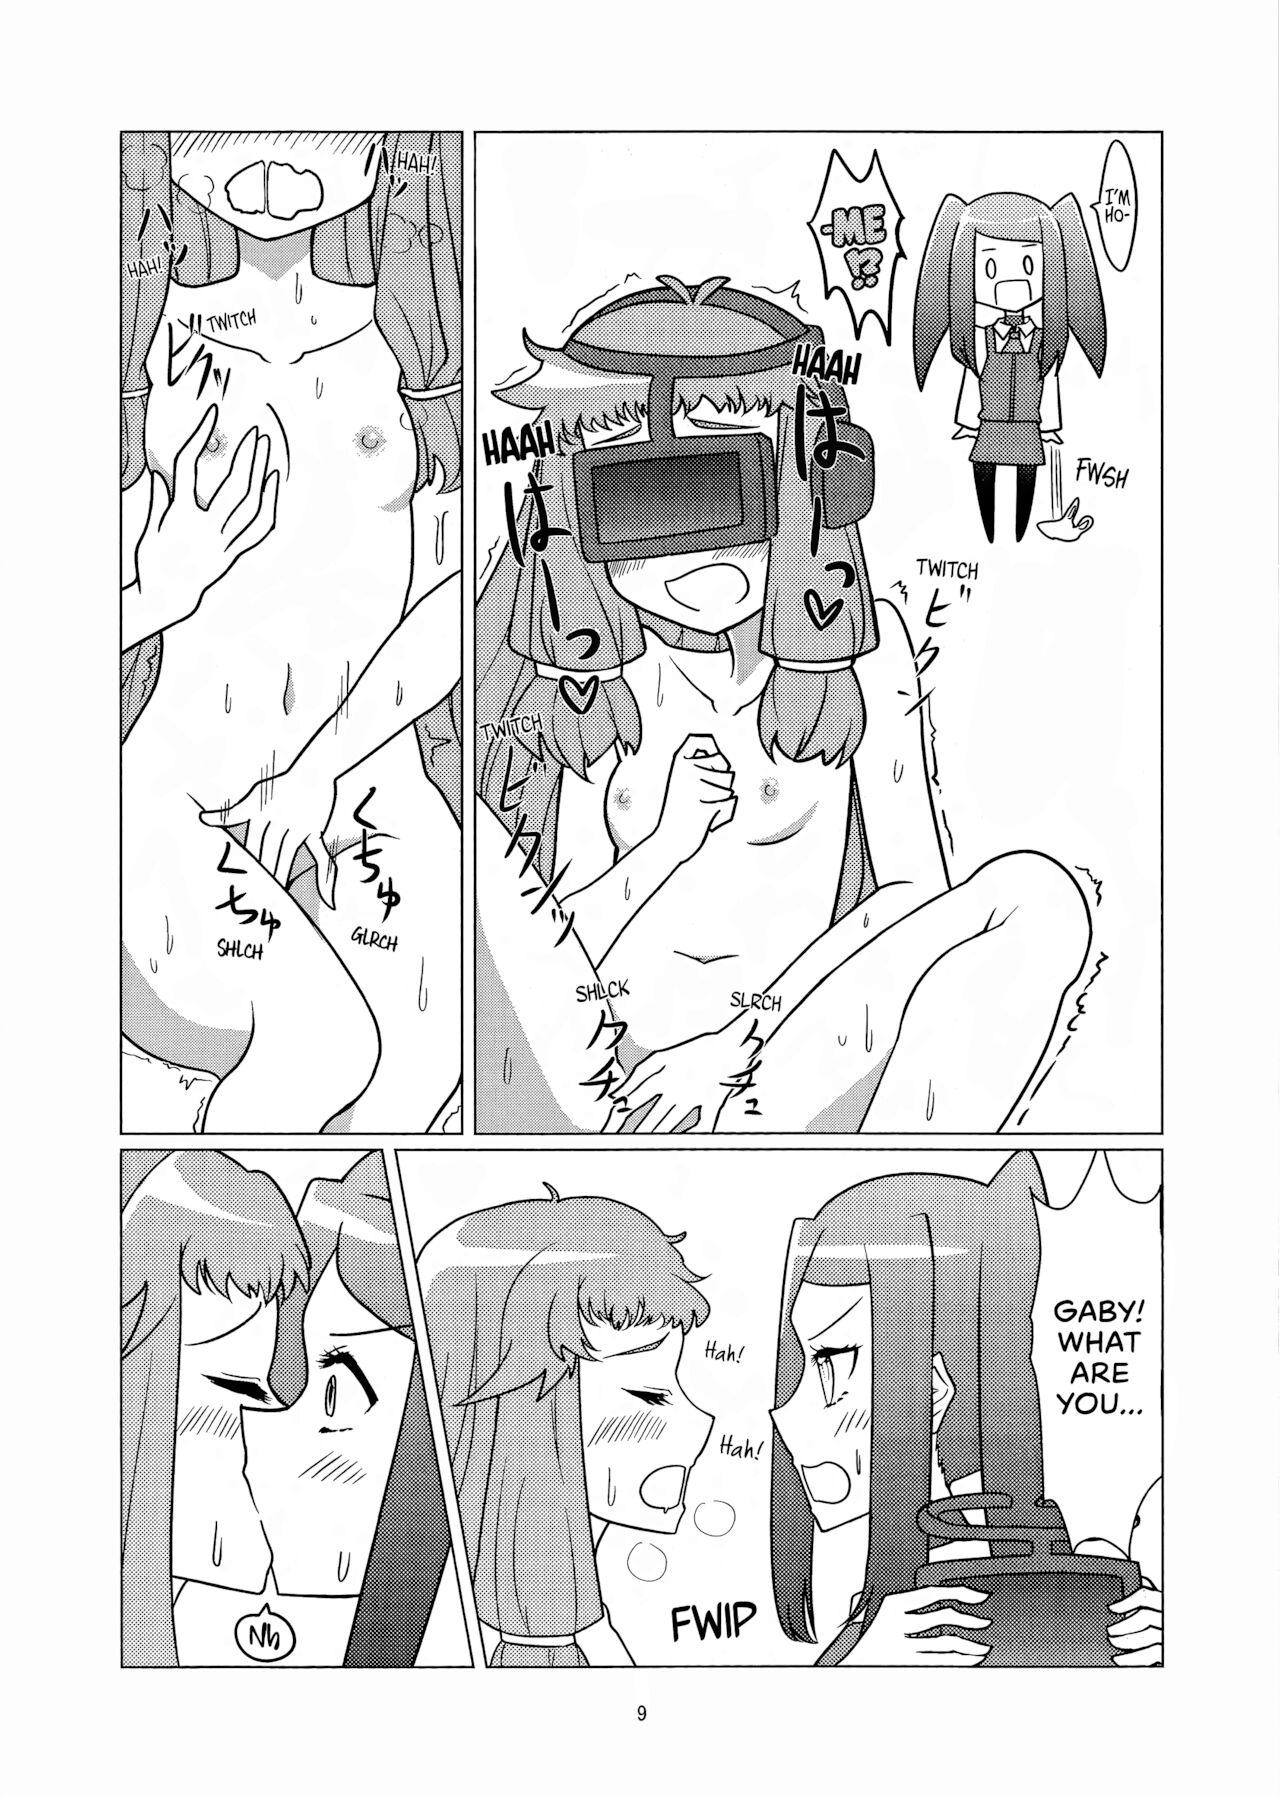 Pure 18 Angel's Share - Va 11 hall a 18 Year Old Porn - Page 8